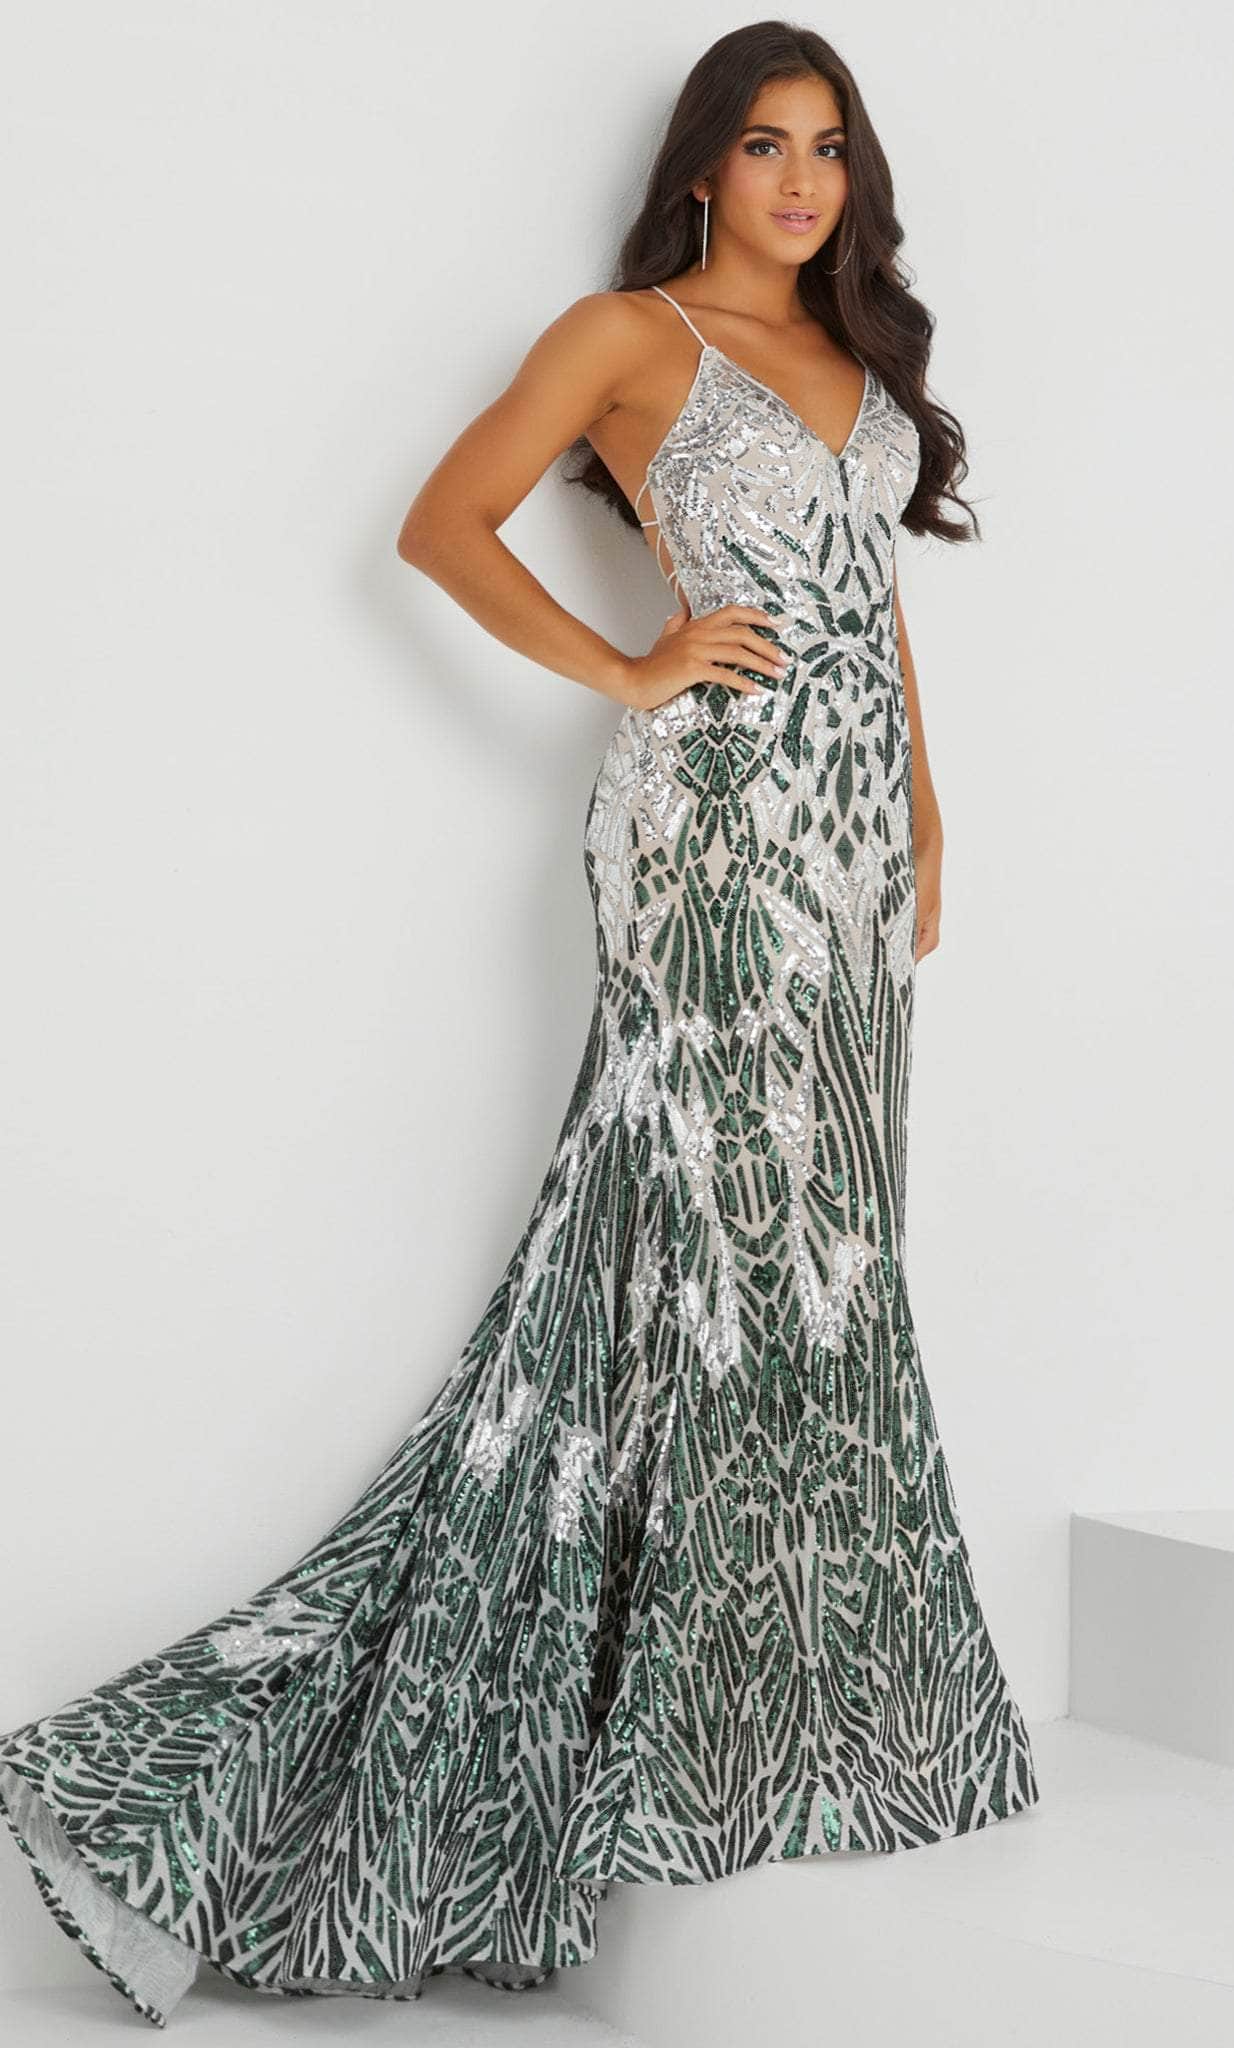 Image of Tiffany Designs by Christina Wu 16023 - Two-toned Sequined Prom Gown